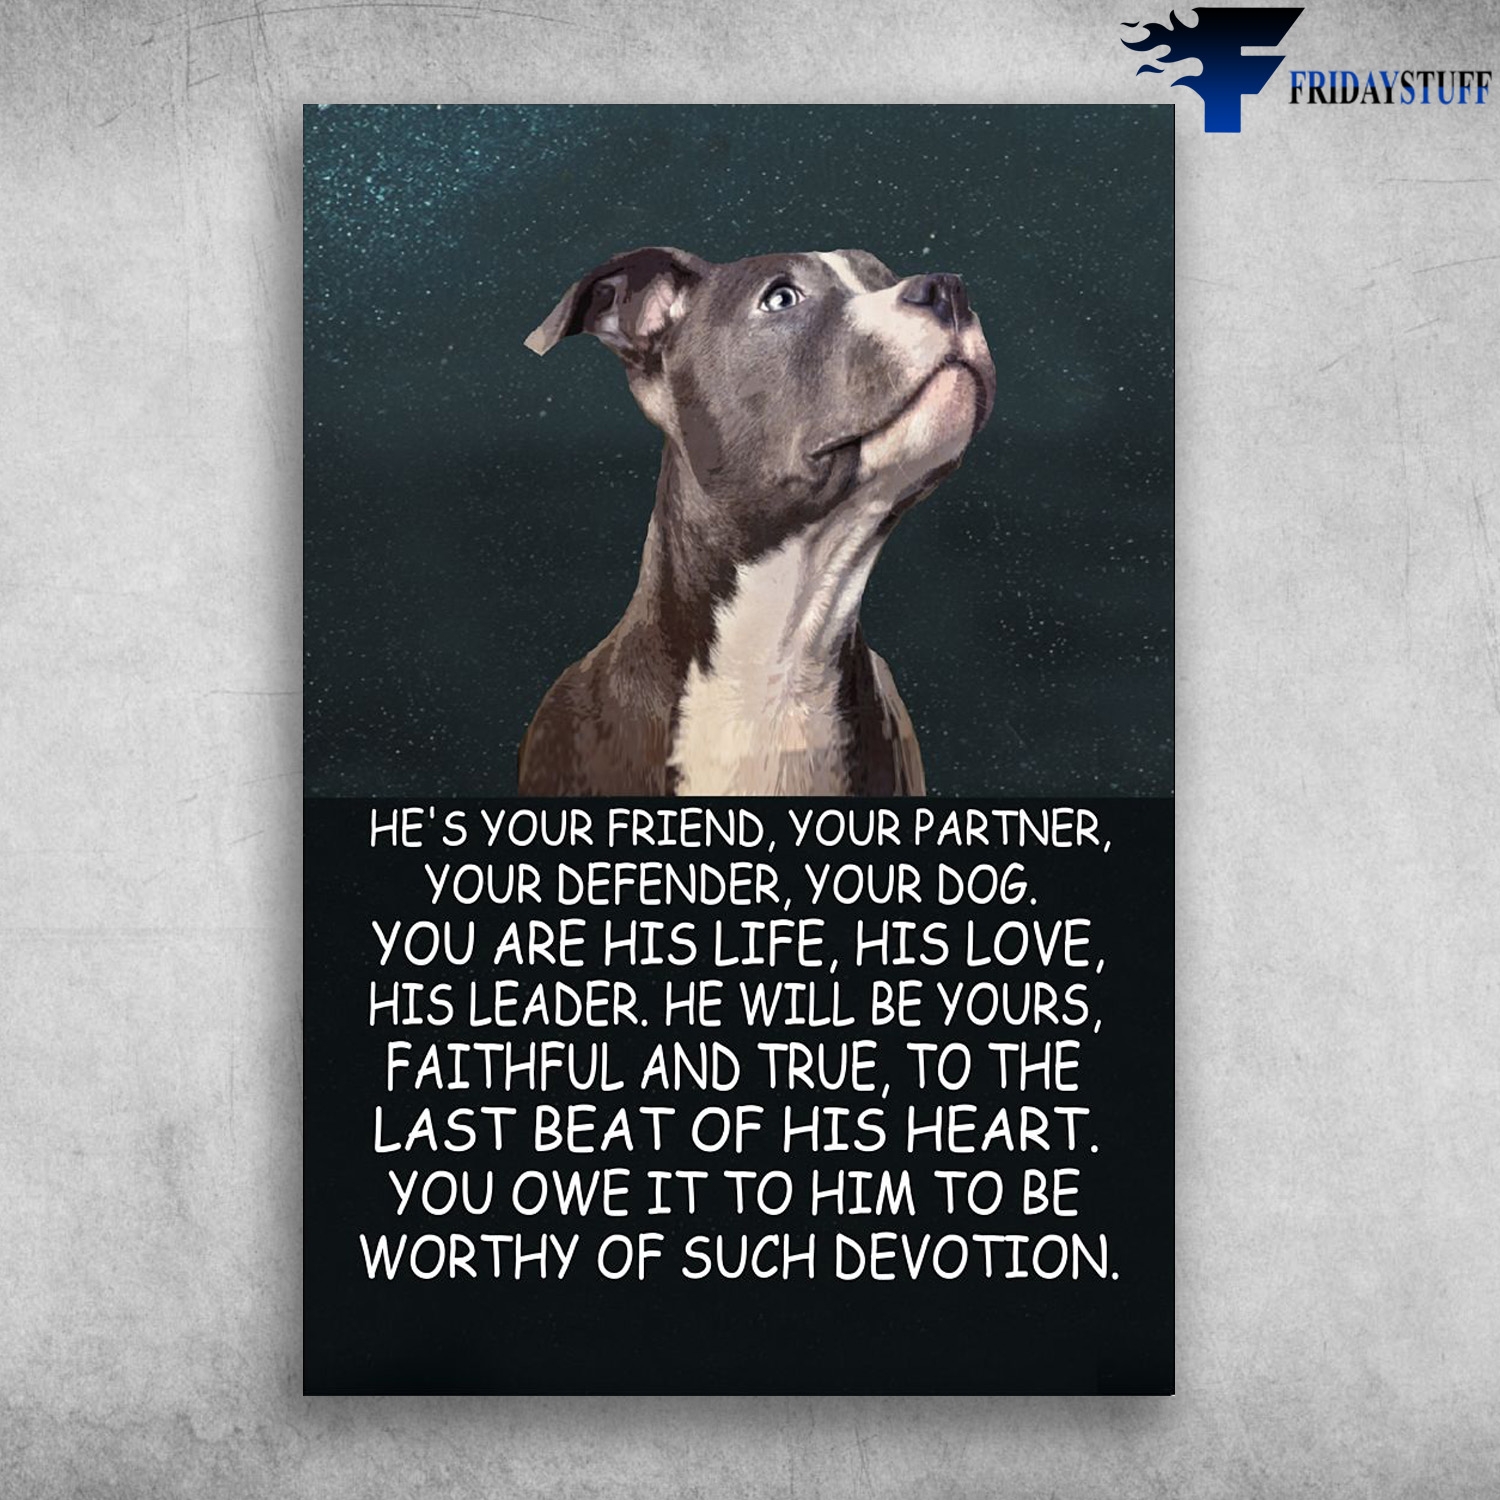 Pitbull - He's Your Friend, Your Partner, Your Defender, Your Dog, You Are His Life, His Love, His Leader, He Will Be Yours, Faithful And True, To The Last Of His Heart, You Owe It To Him, To Be Worthy Of Such Devotion